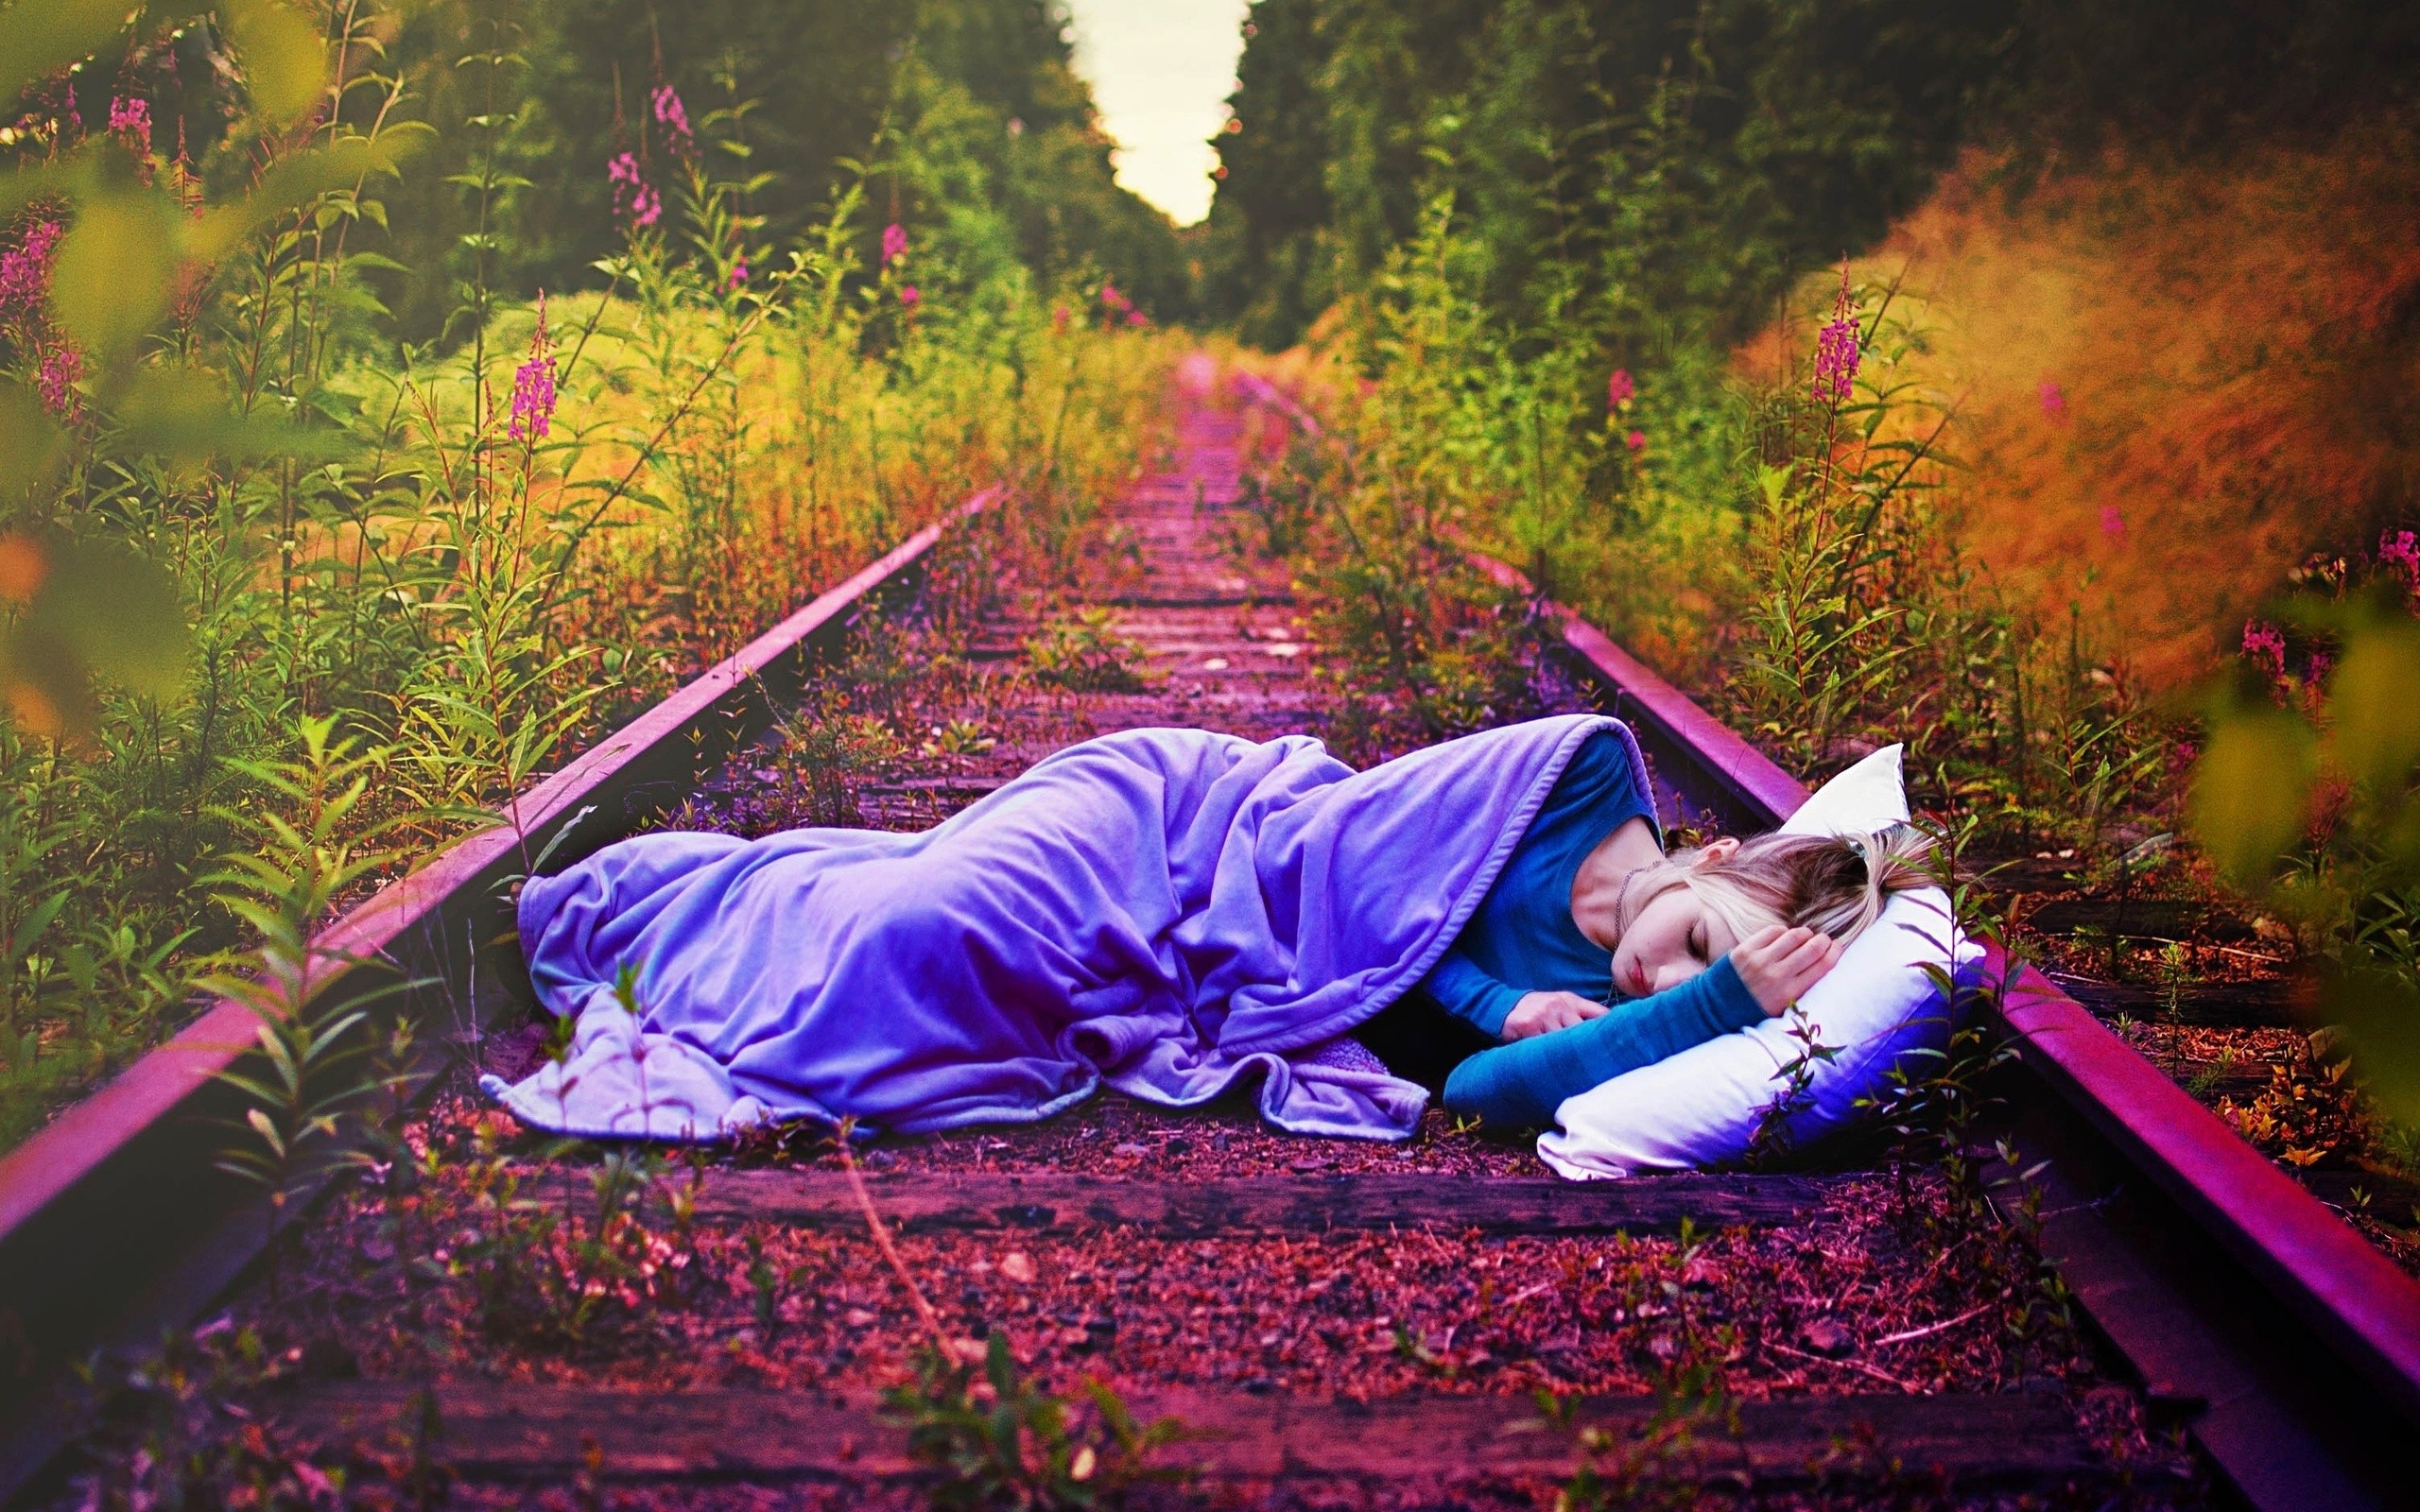 Dream Girl on Train Road Plants hd wallpapers | Only hd wallpapers